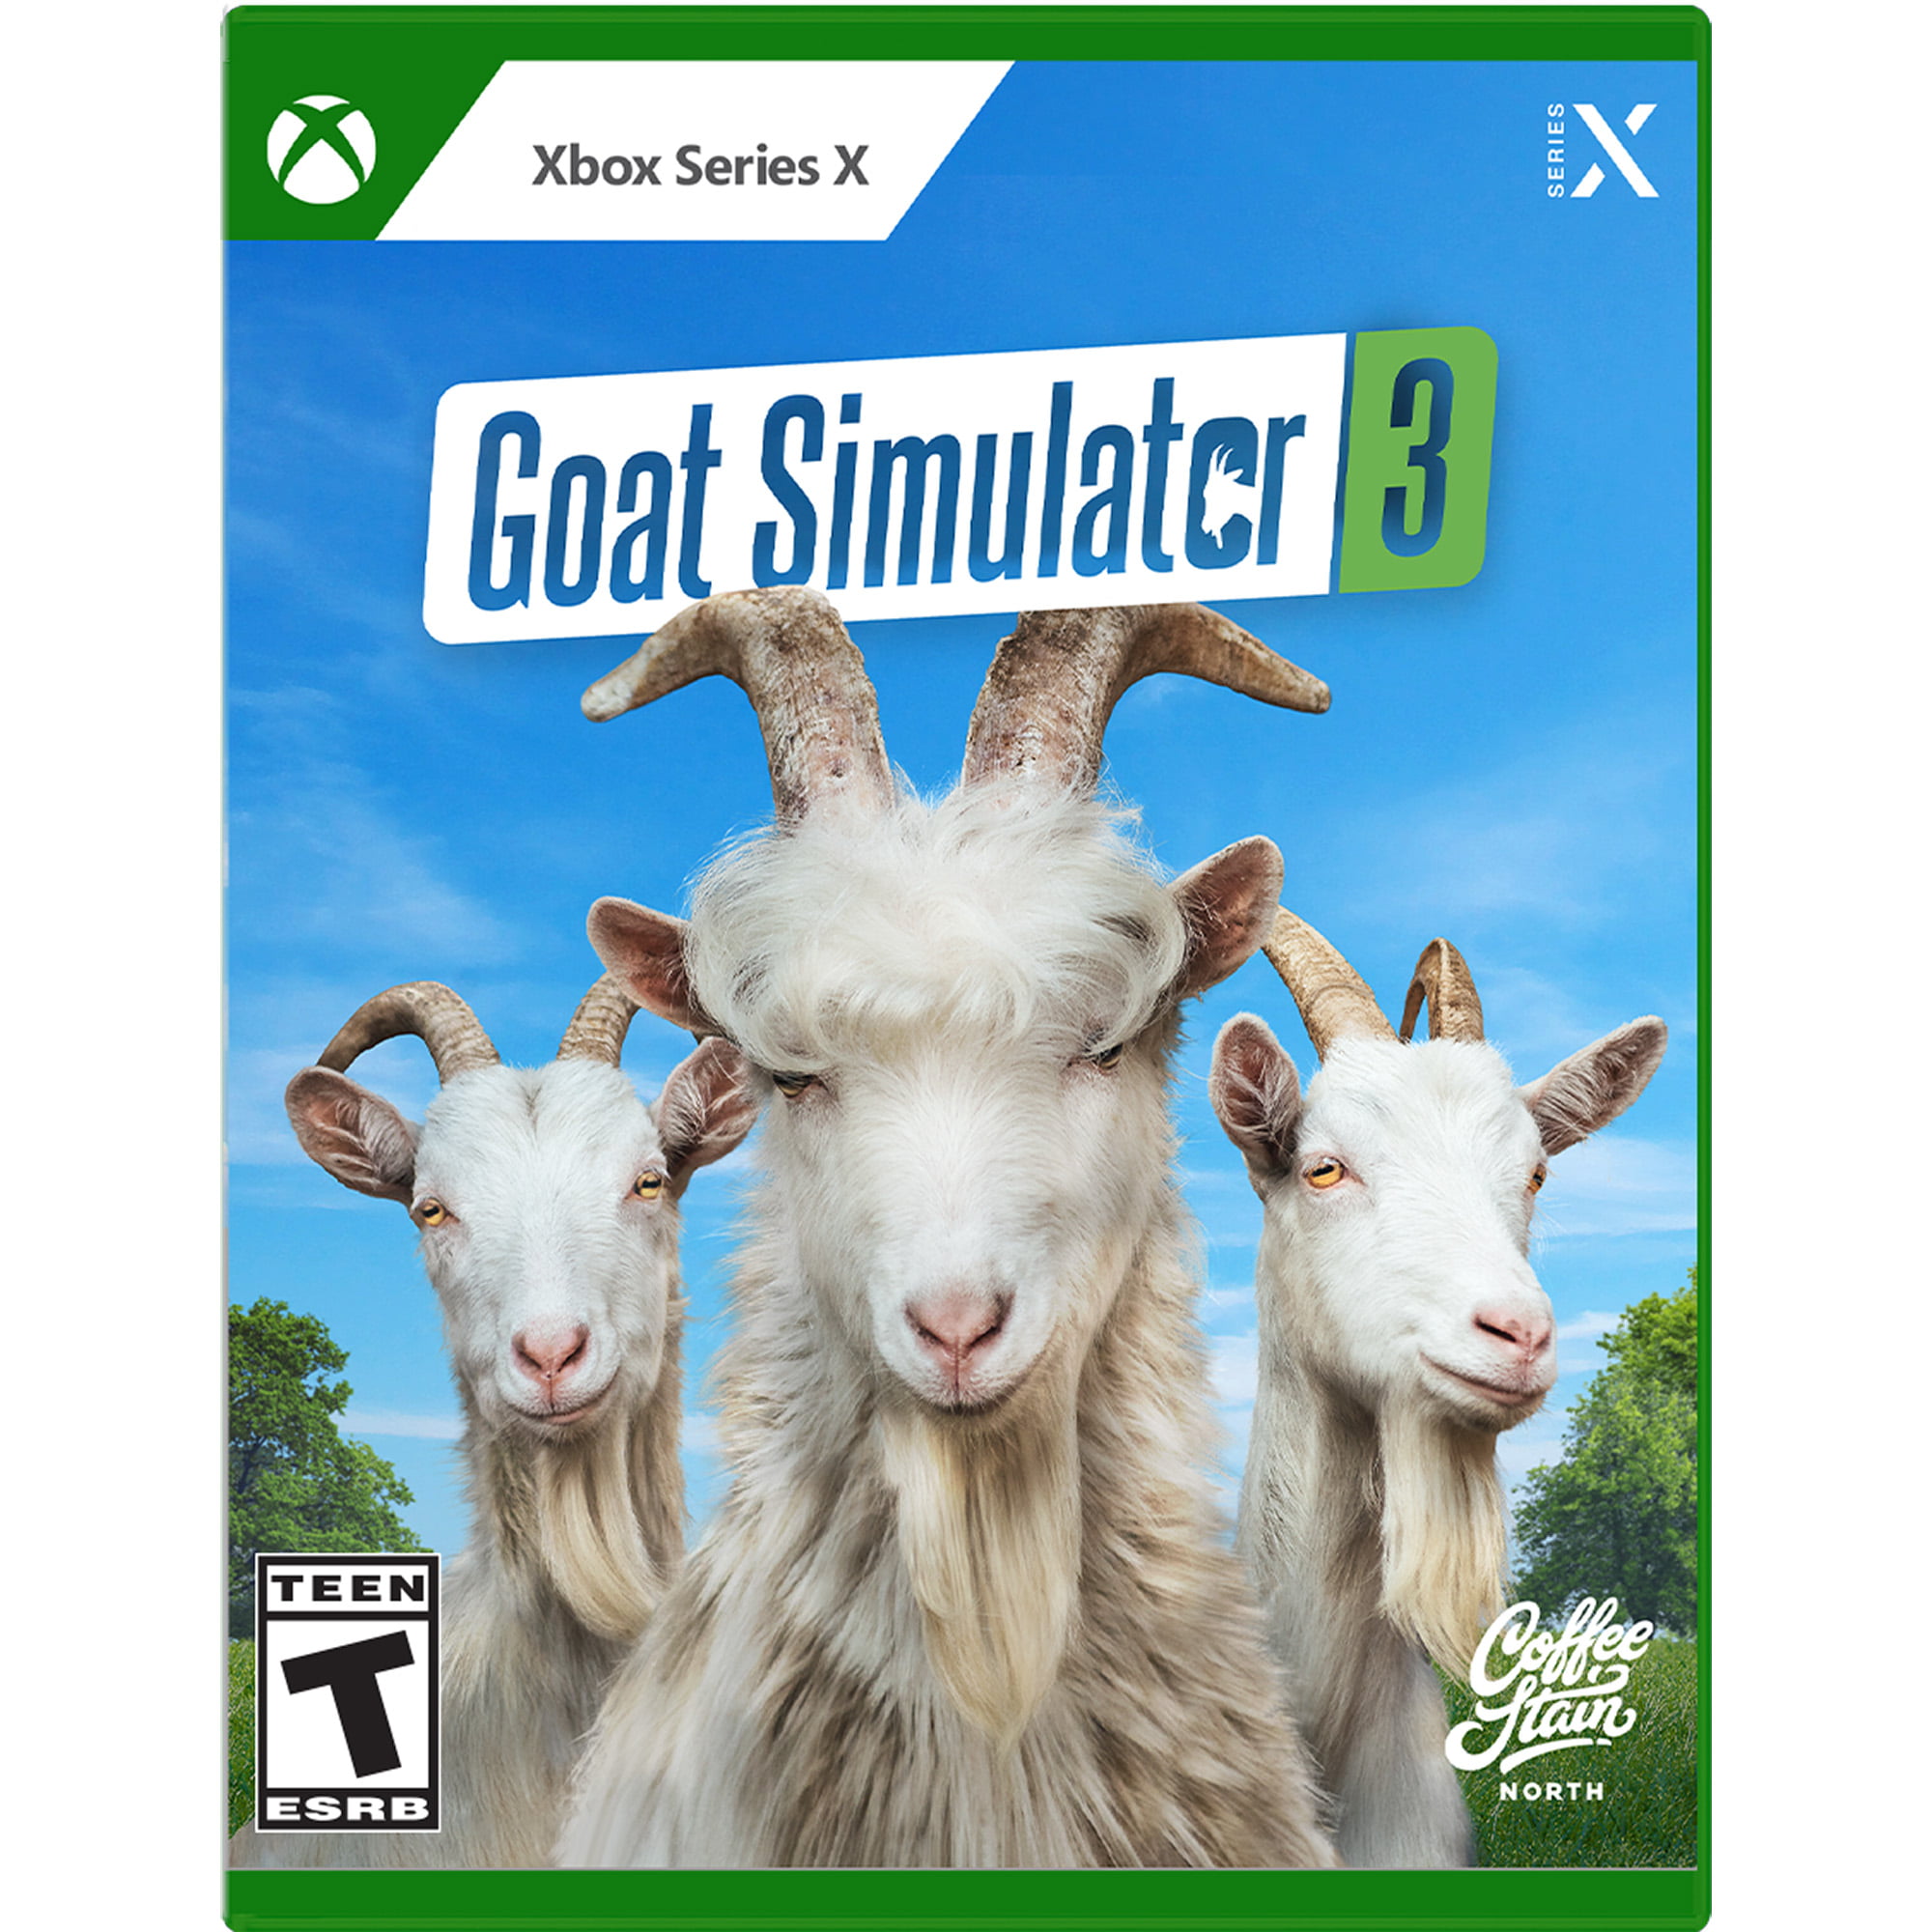 Goat Simulator 3 (Xbox Series X Physical) $19.93 + Free Shipping w/ Walmart+ or on $35+